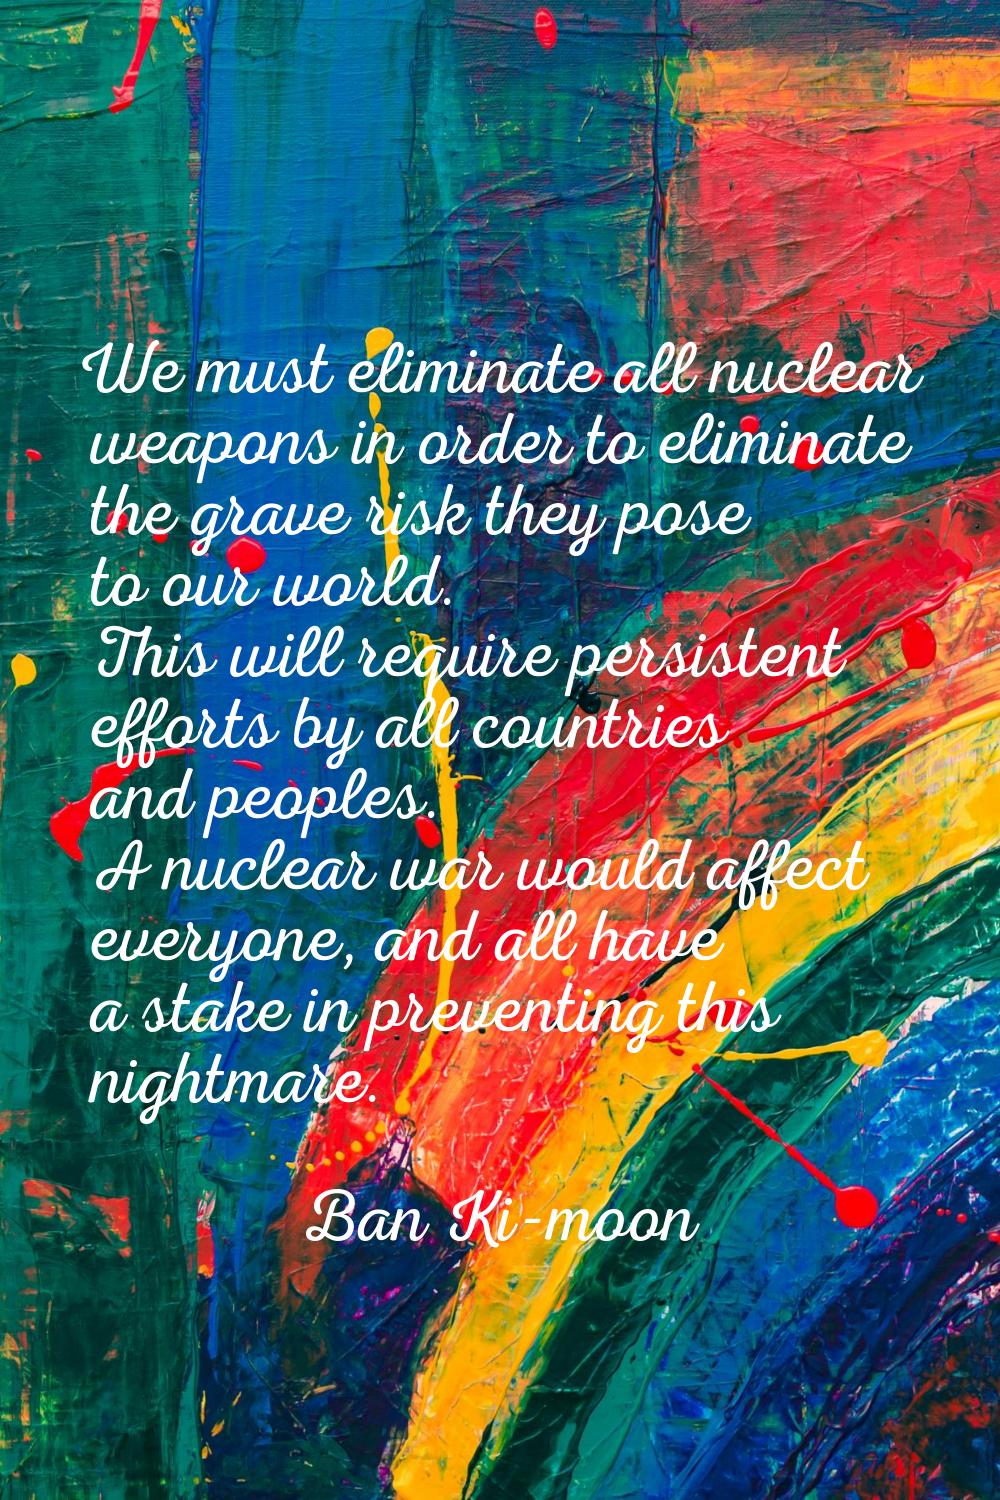 We must eliminate all nuclear weapons in order to eliminate the grave risk they pose to our world. 